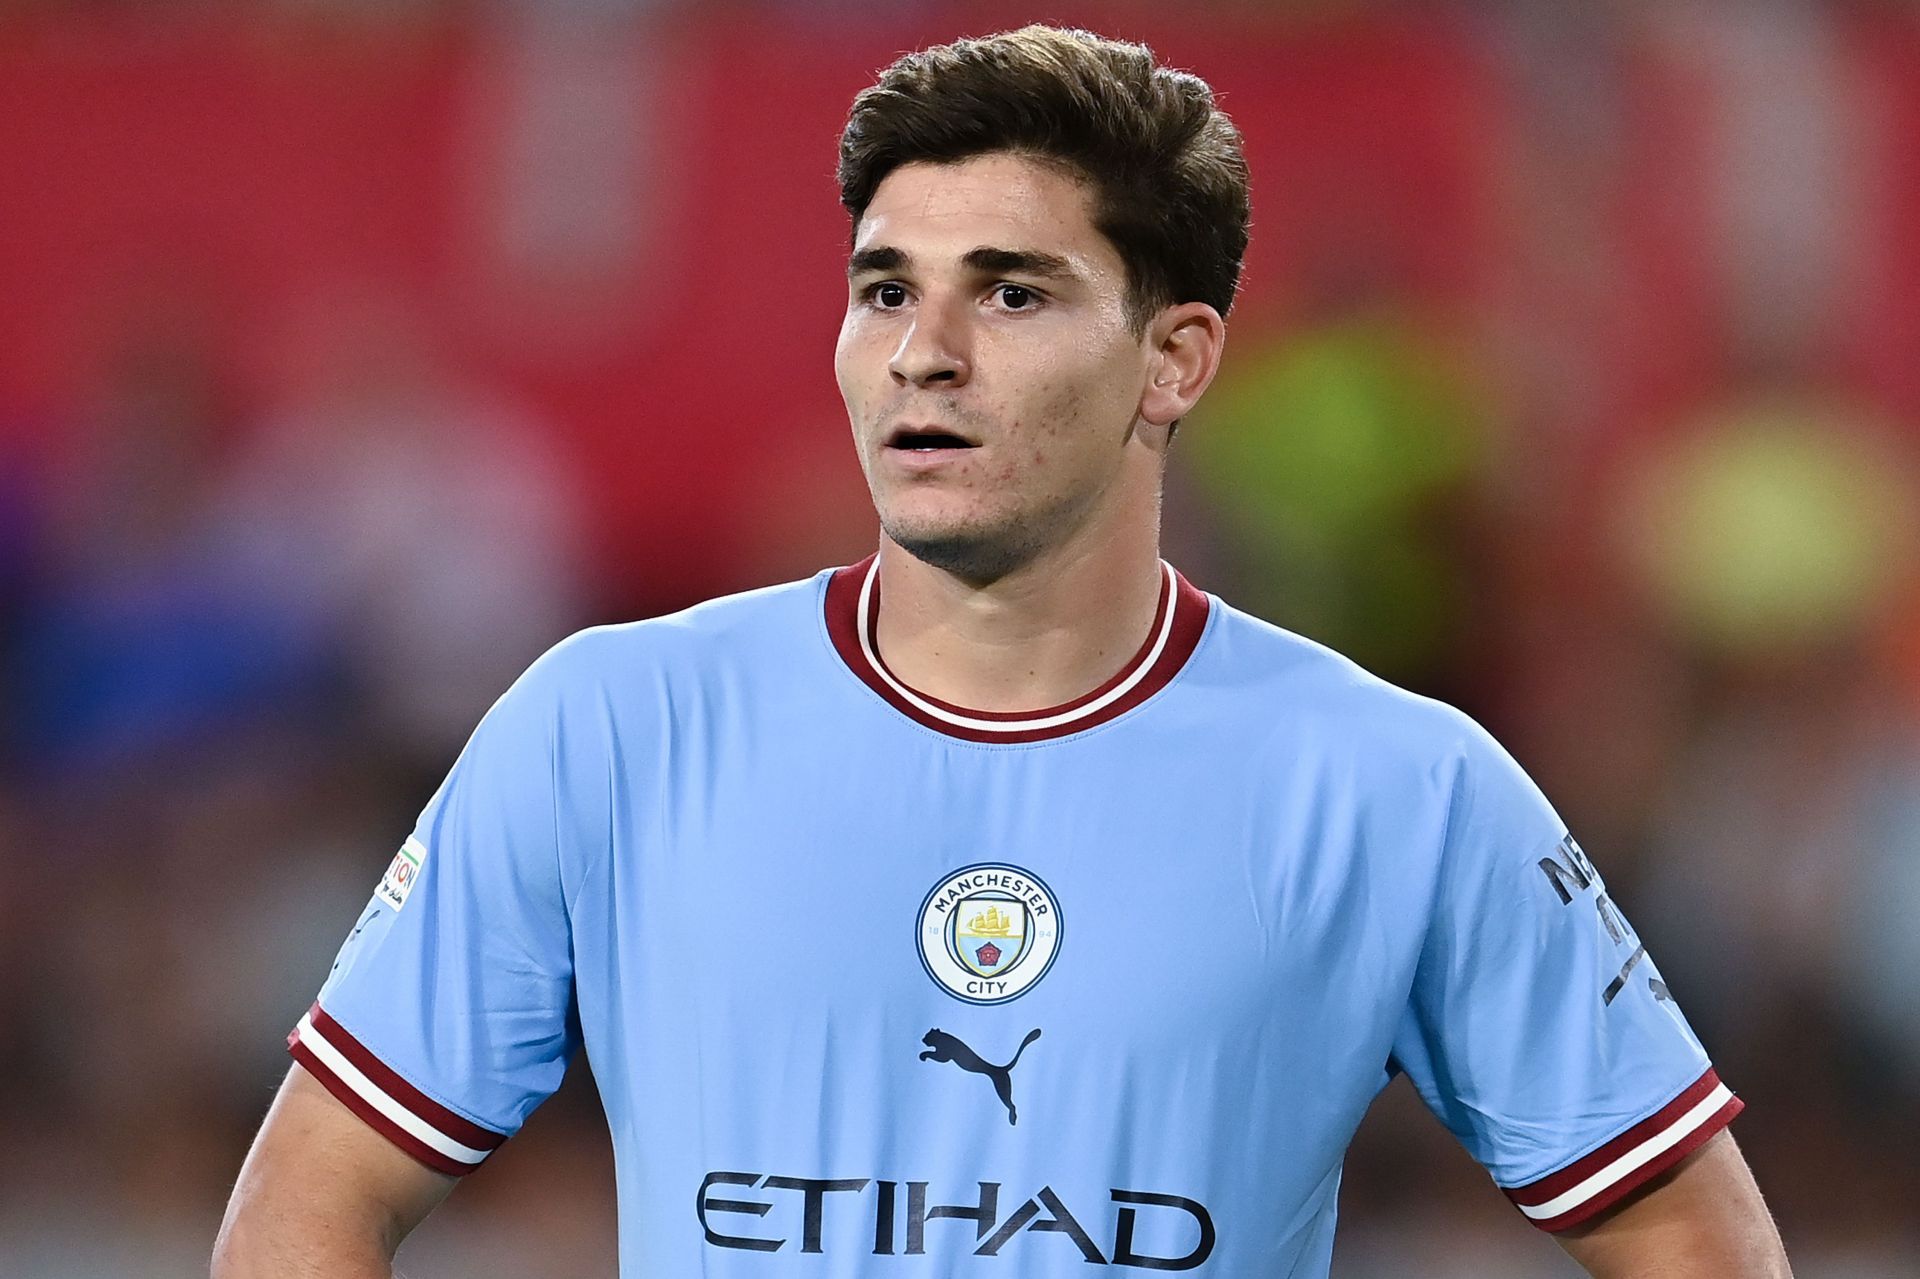 Julian Alvarez moved to Manchester City this summer.